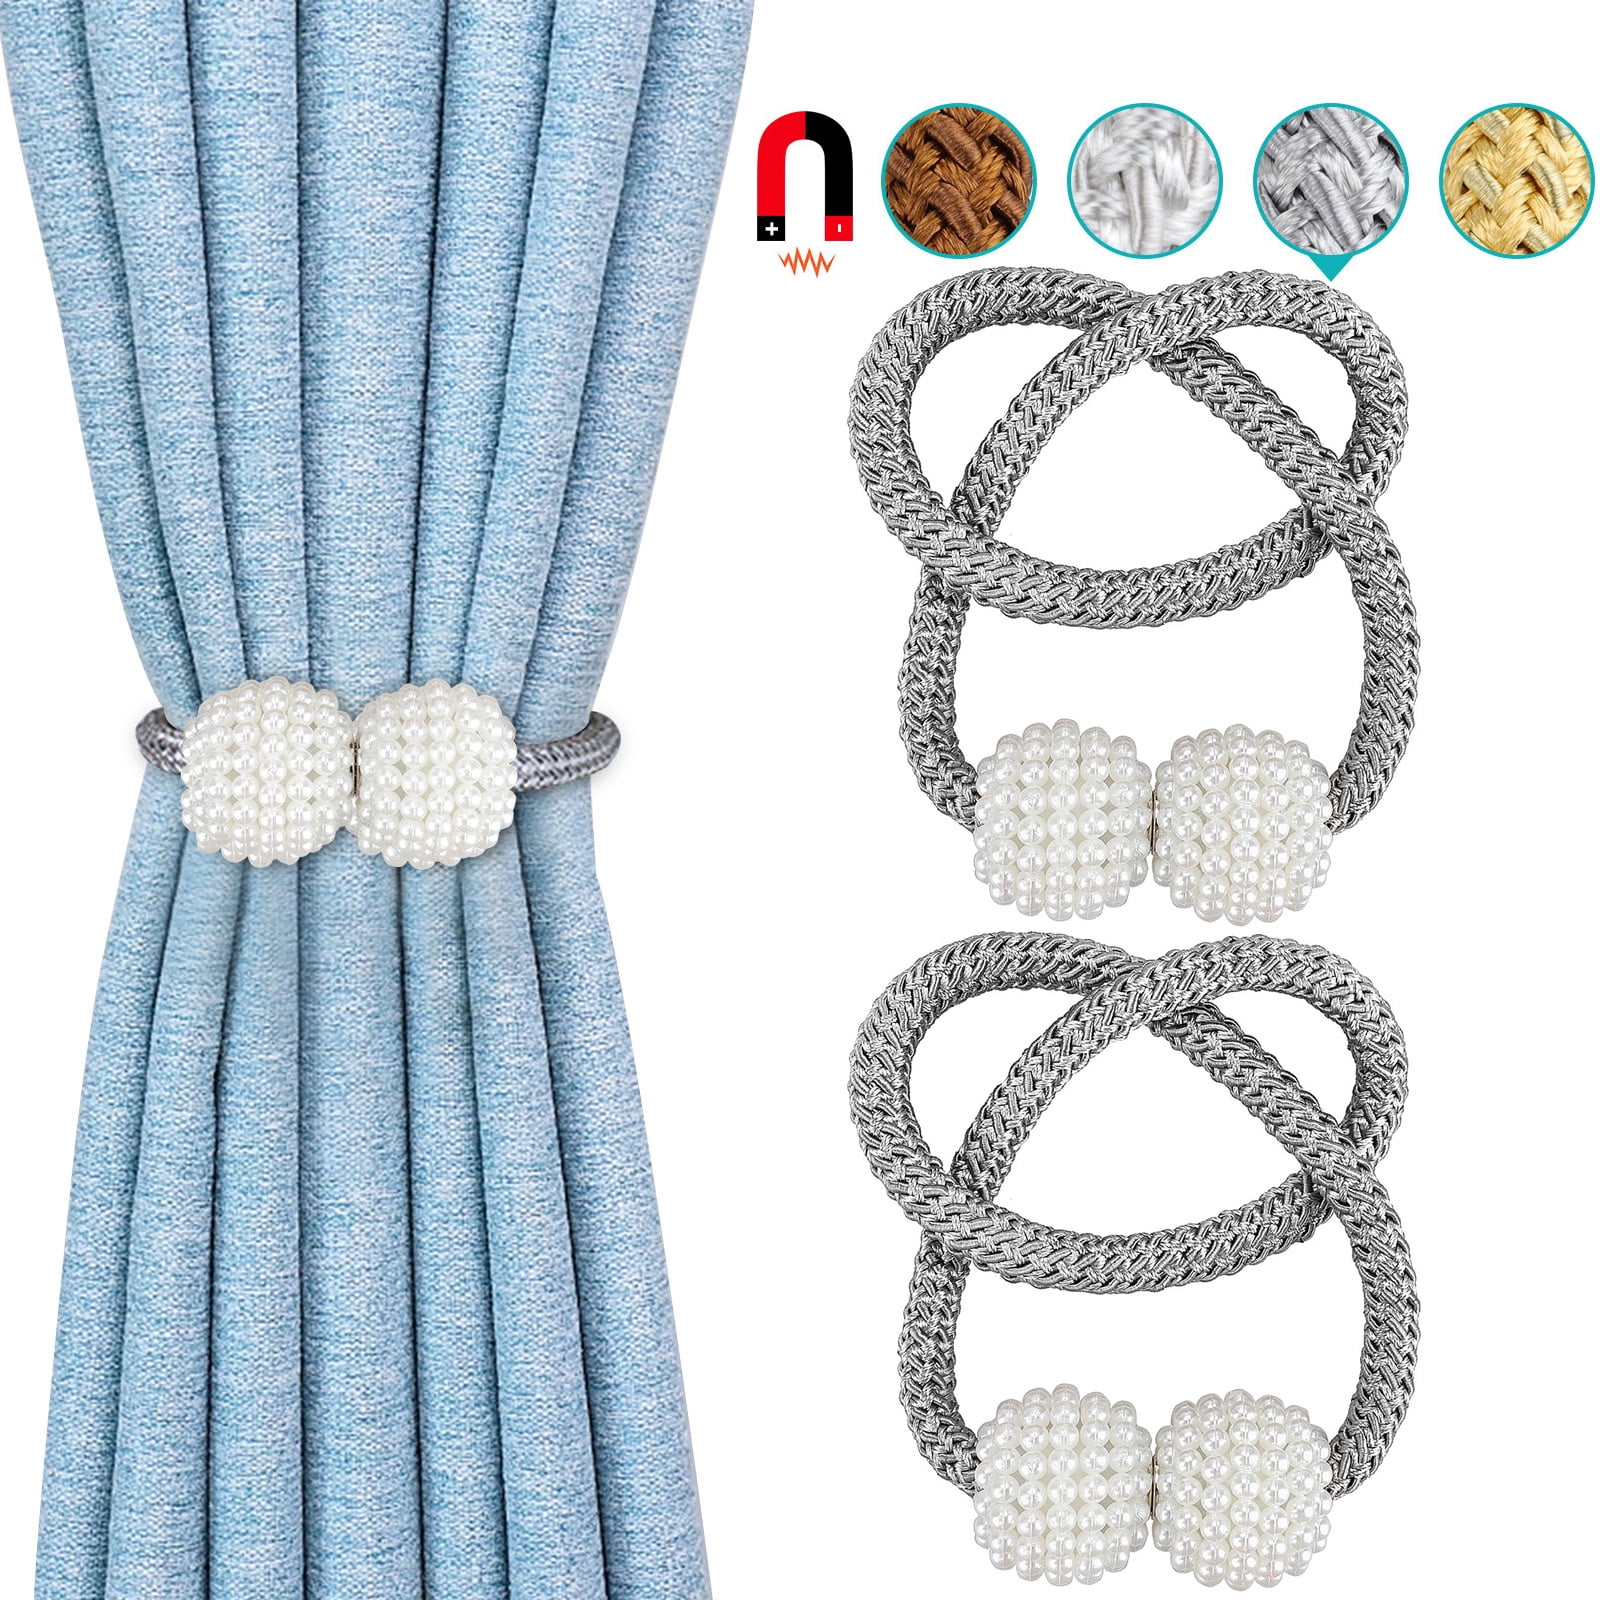 Kare & Kind Magnetic Curtain Tiebacks Thick Curtains Ball-Shaped 45cm in Length- for Thin Draperies for Homes Indoor and Outdoor Curtains Gold 2X Decorative Rope Holdbacks 